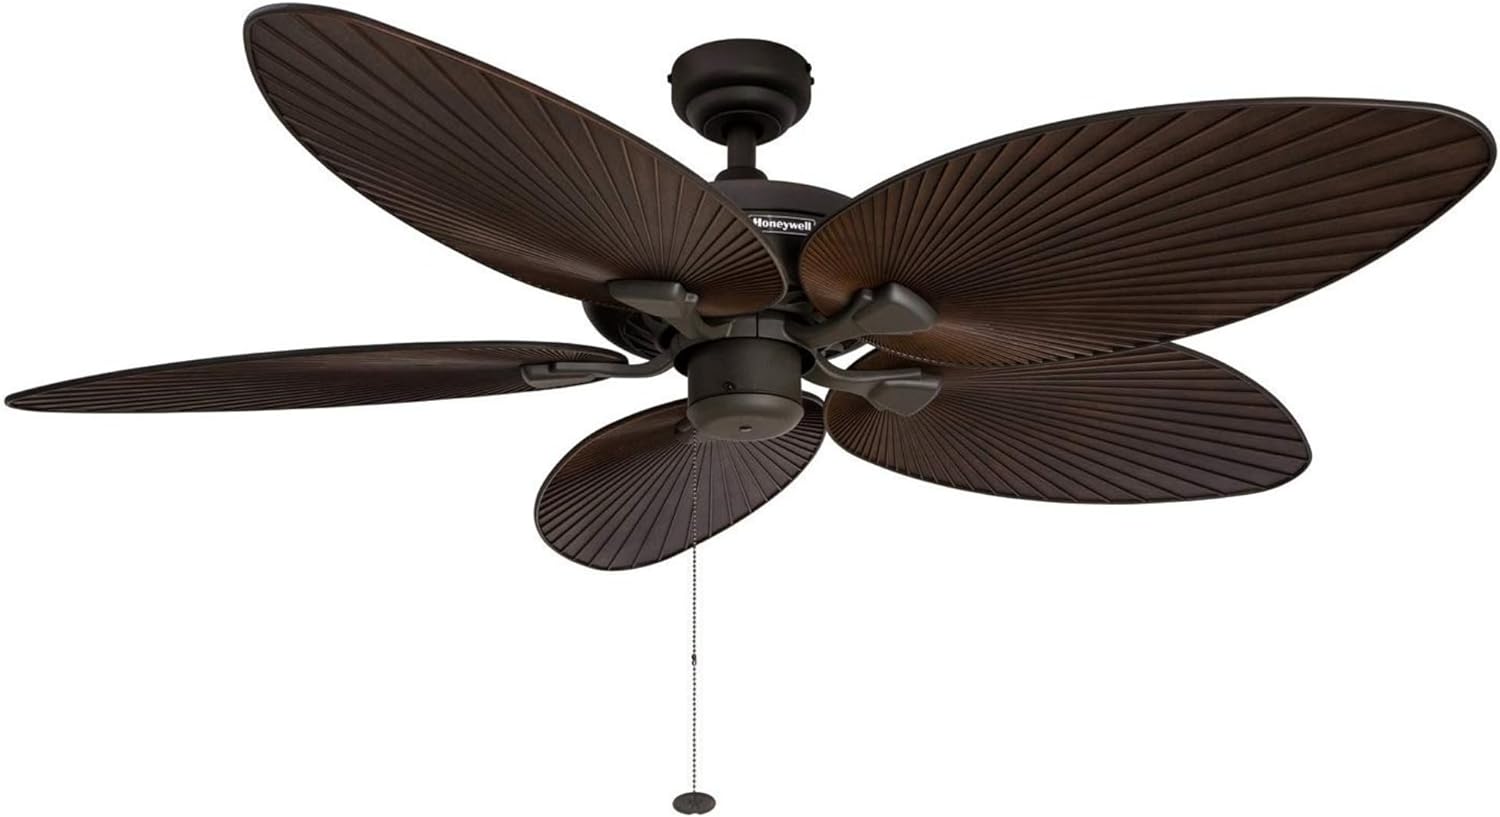 Honeywell Ceiling Fans Palm Island, 52 Inch Tropical Indoor Outdoor Ceiling Fan with No Light, Pull Chain, Three Mounting Options, 5 Palm Leaf Blades, Wet-Rated - 50207-01 (Bronze)